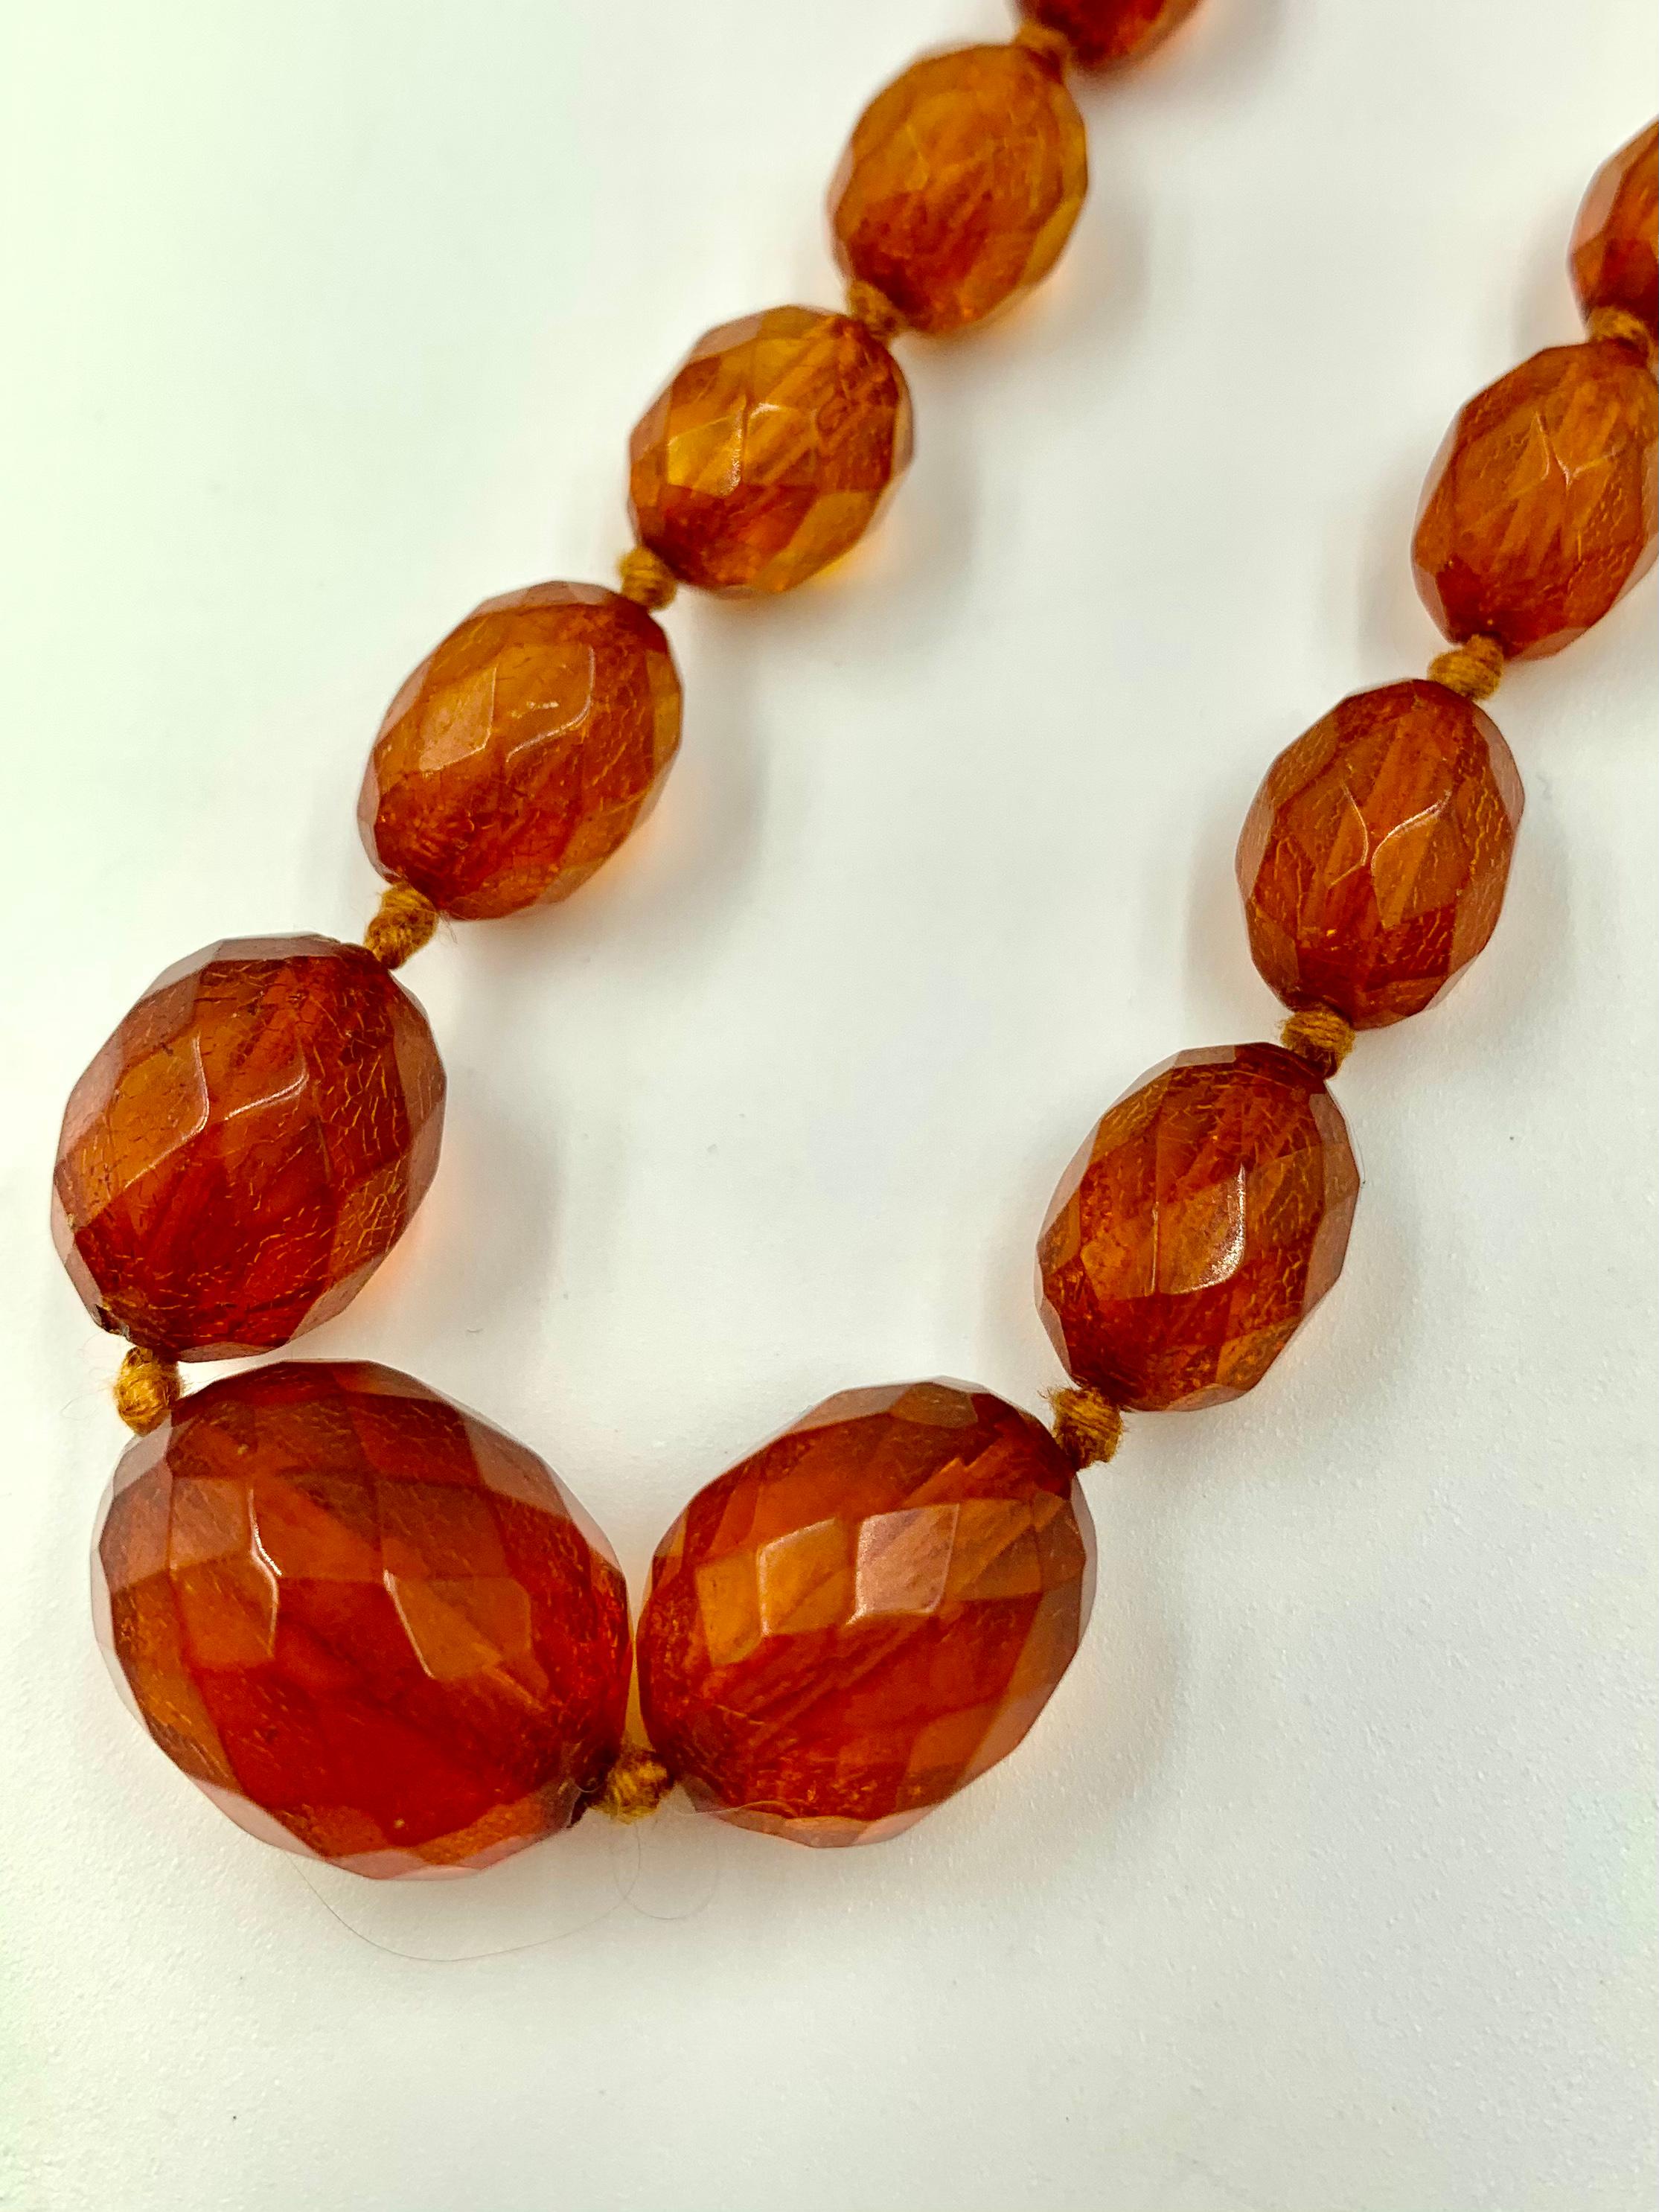 Natural antique honey colored amber necklace composed of 42 oval hand faceted natural amber beads 19mm to 10mm. Very good condition, the beads translucent and showing lovely crazing consistent with antique amber.
Amber has a naturally occurring